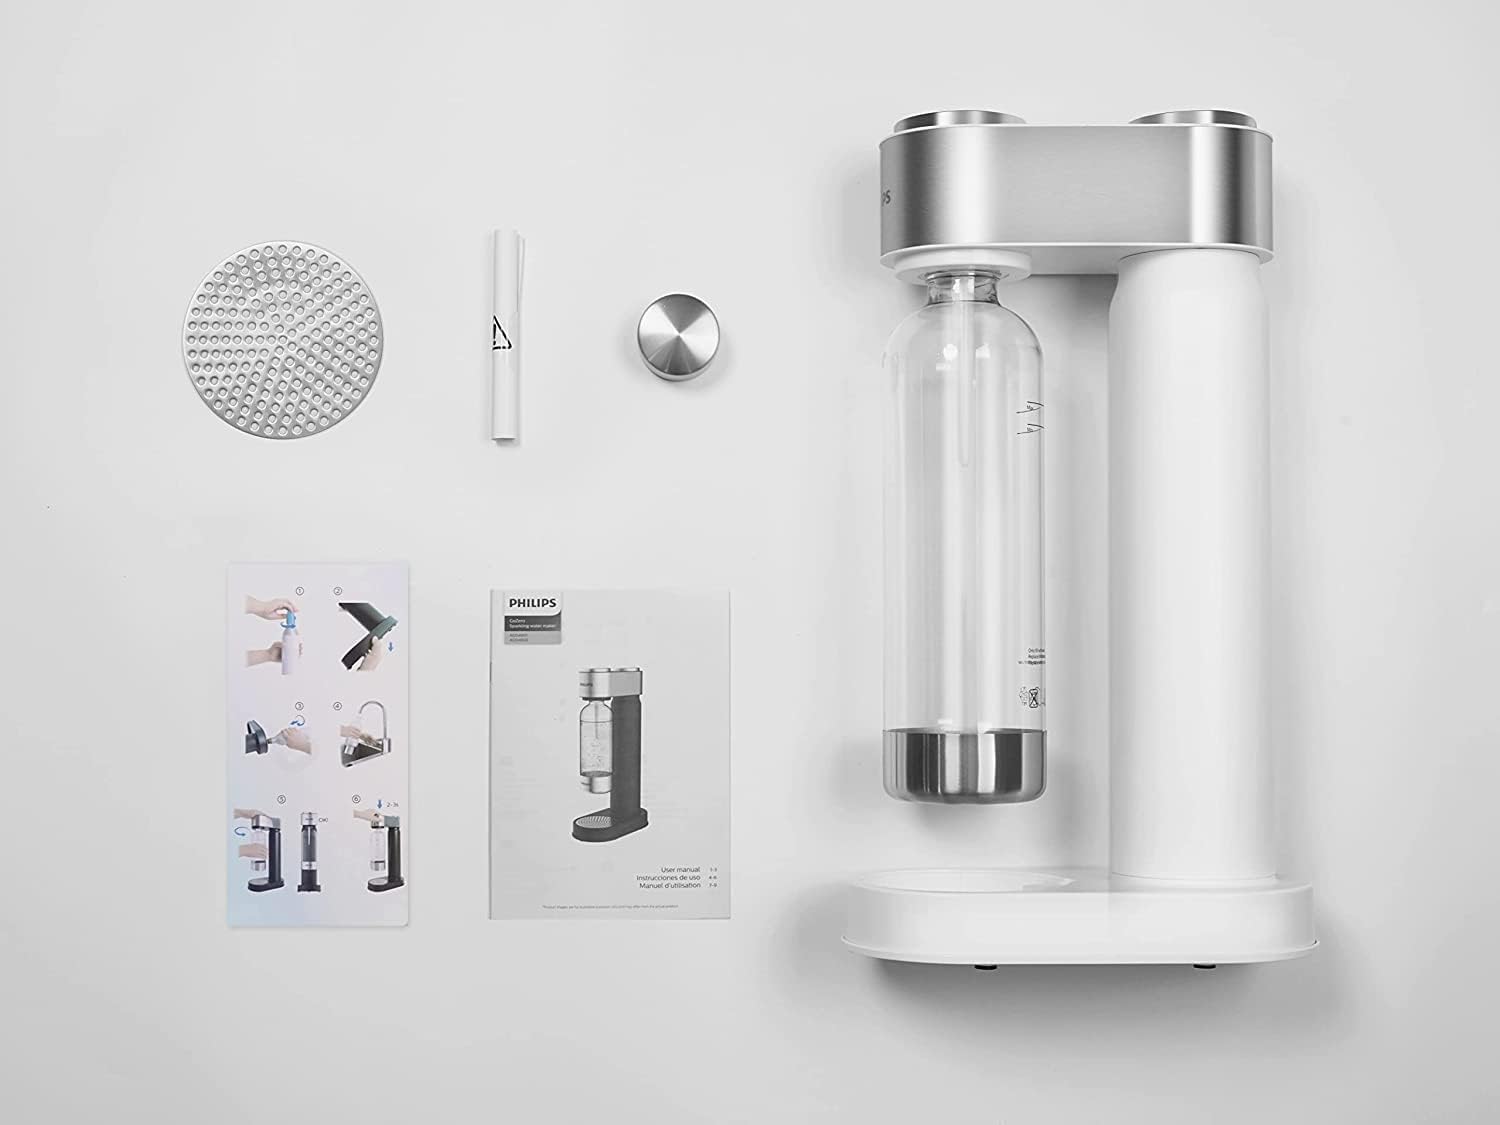 Synopsis: Philips Stainless Sparkling Water Maker Soda Maker Machine